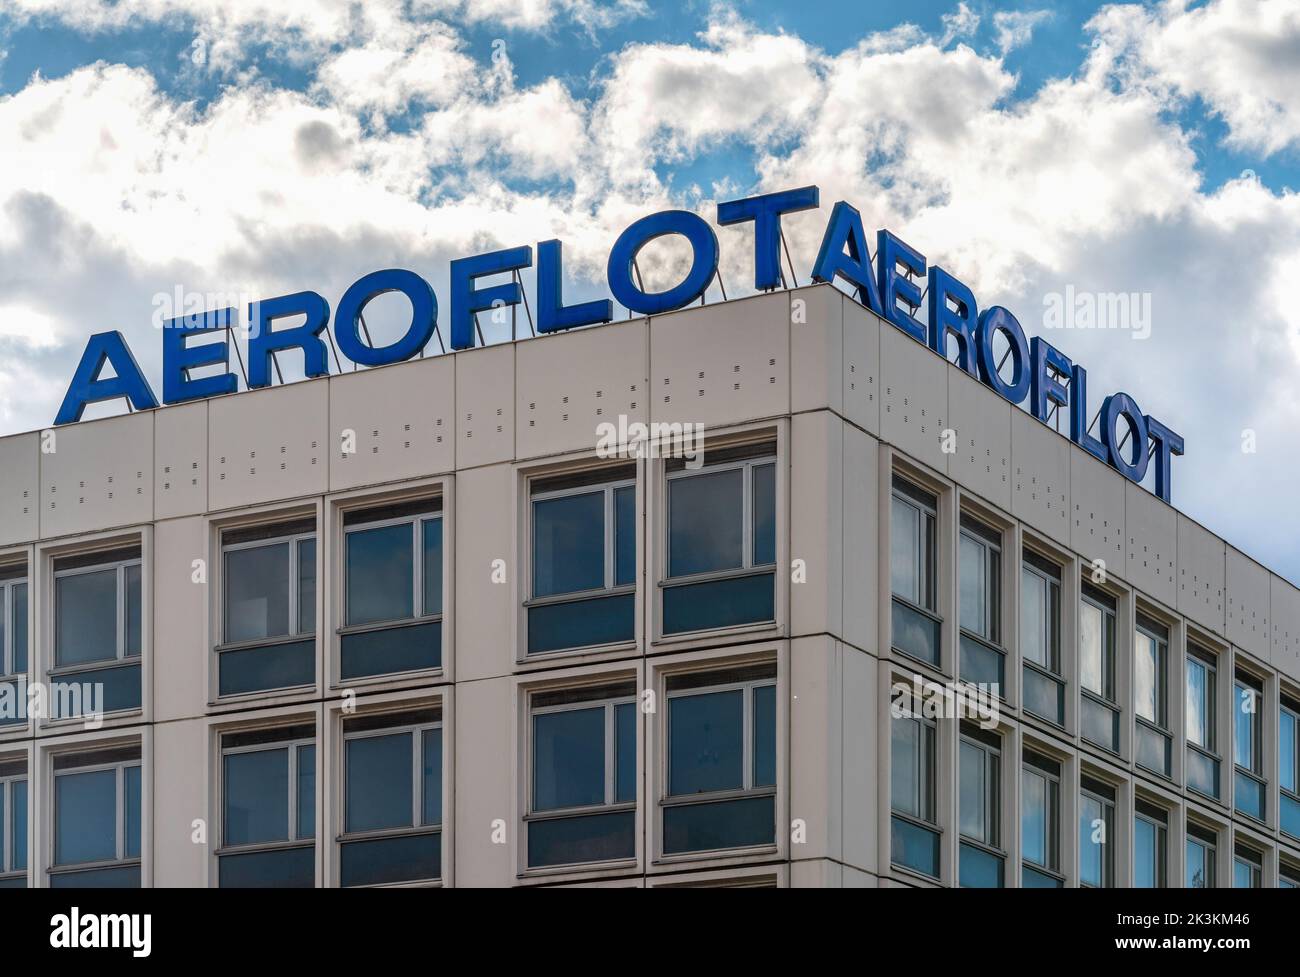 Aeroflot Russian airline offices along Unter den Linded in Berlin, Germany, Europe Stock Photo